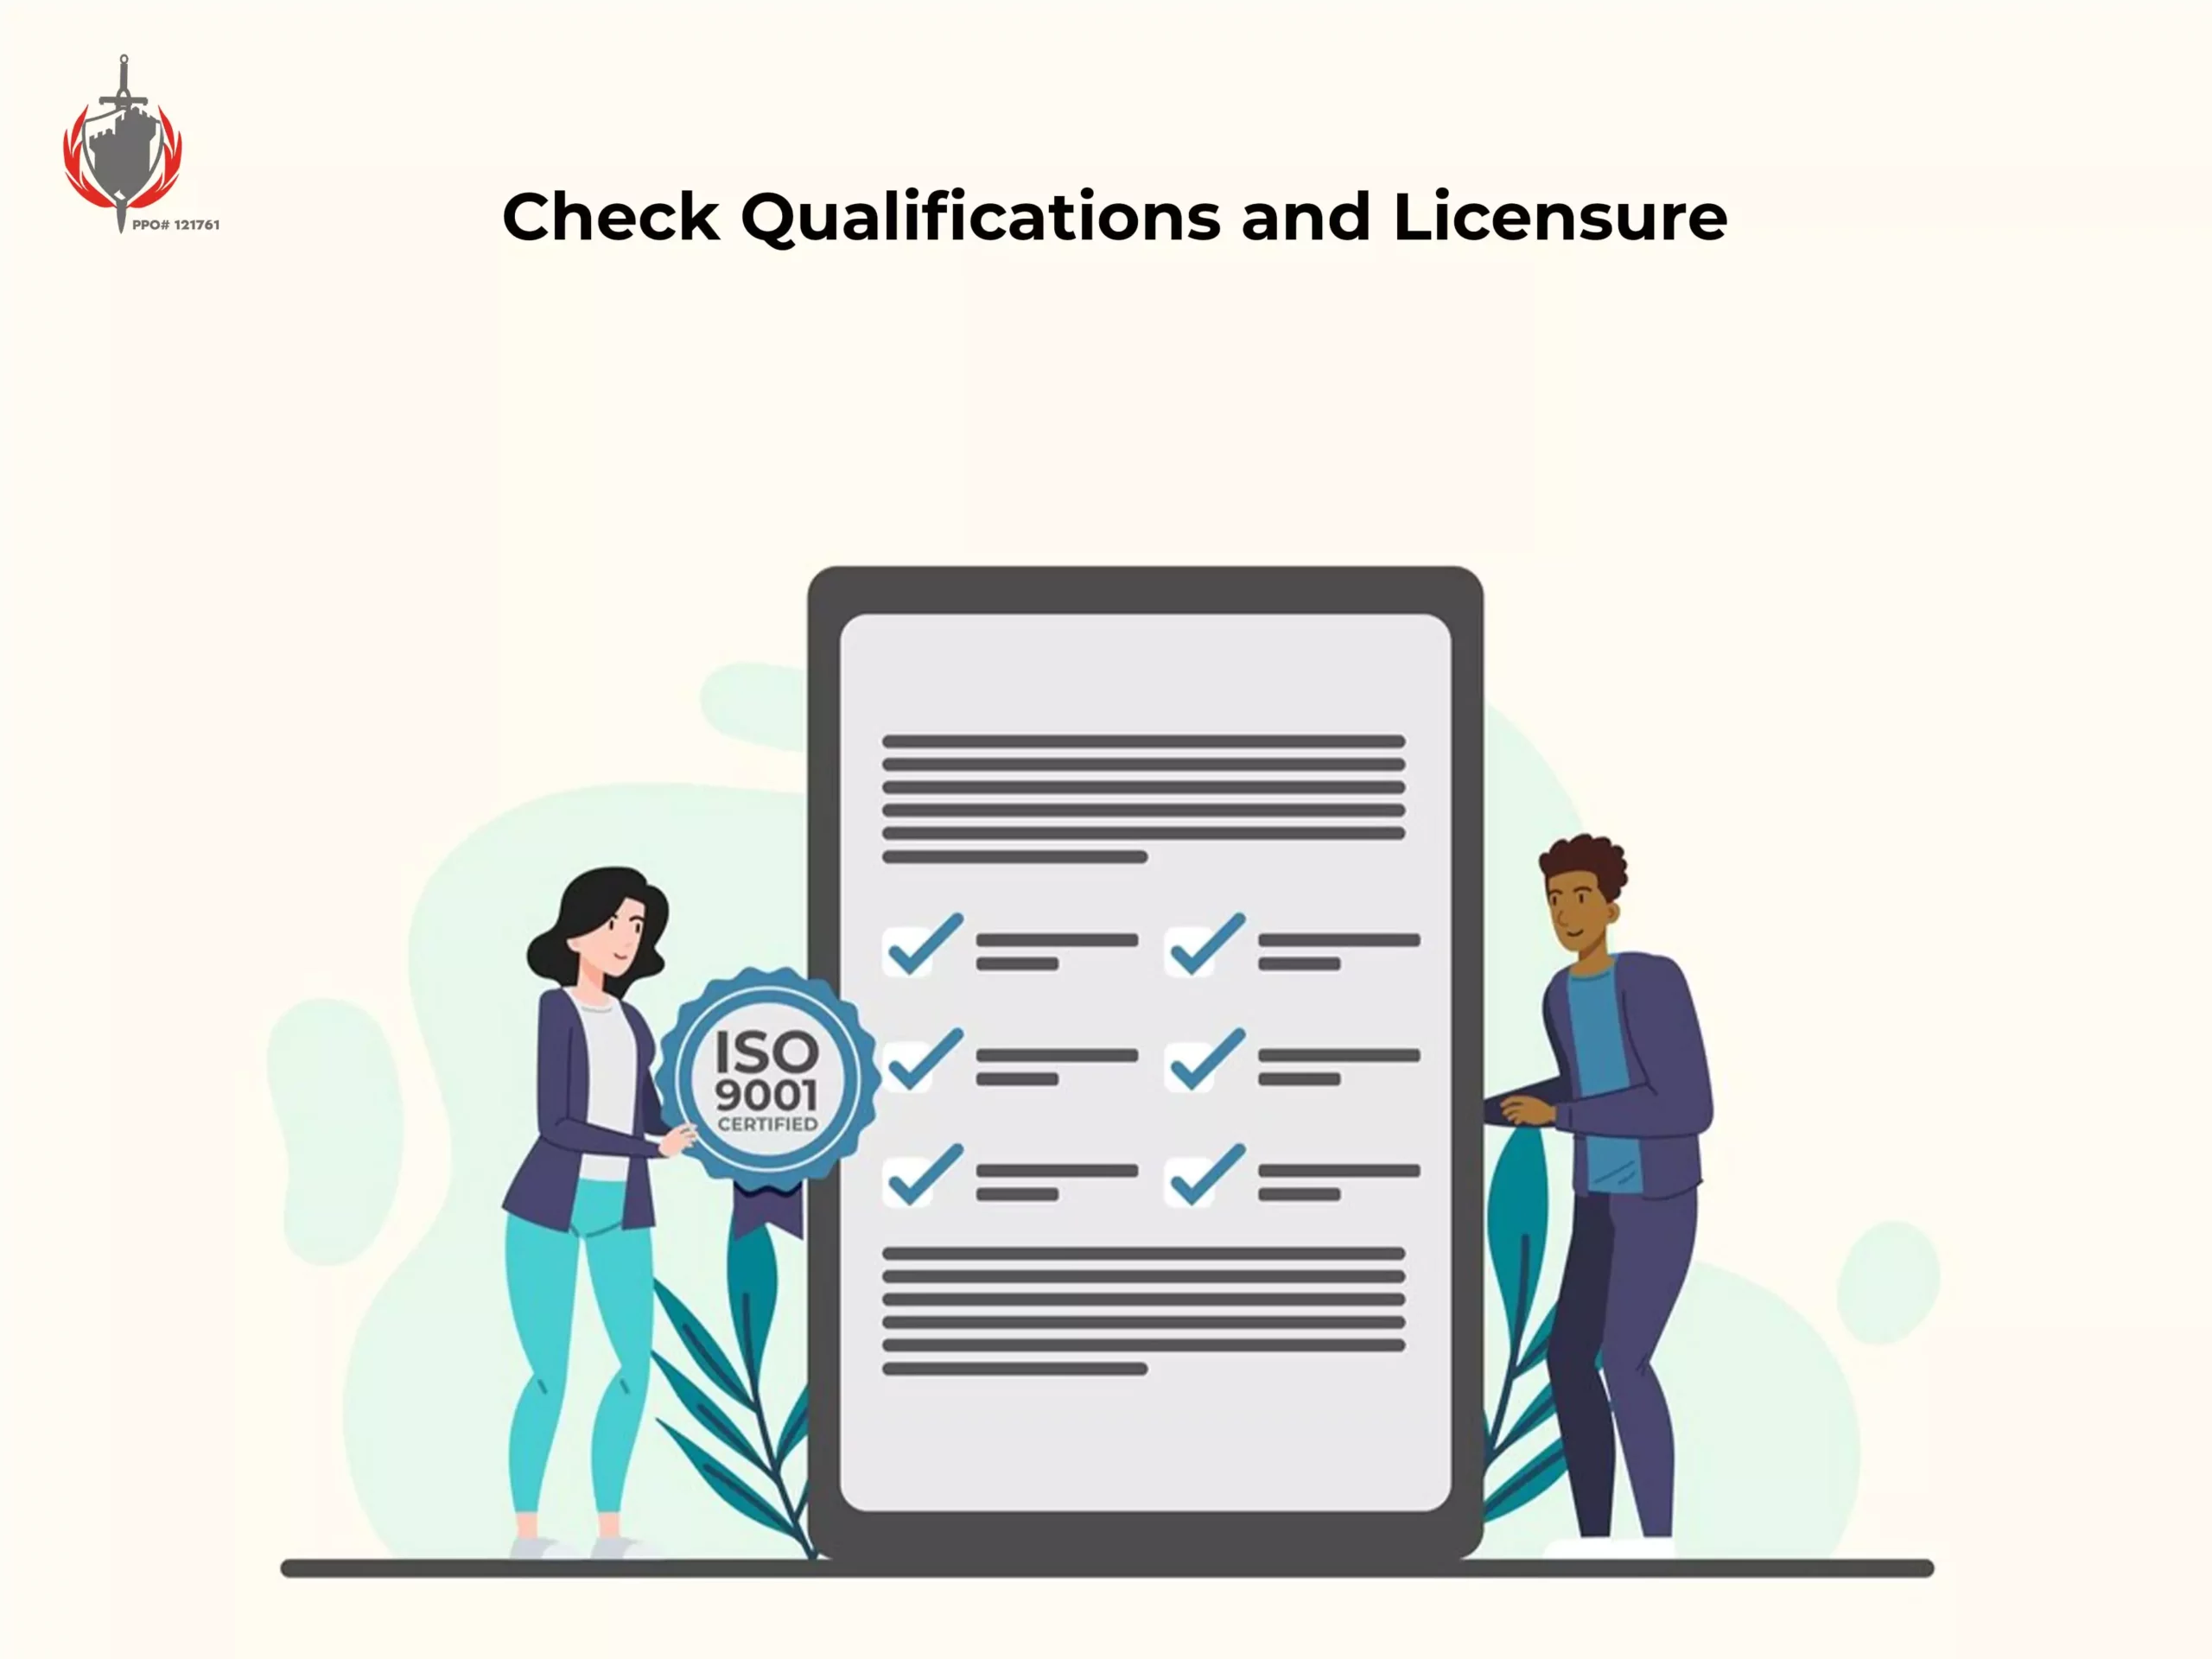 Check Qualifications and Licensure